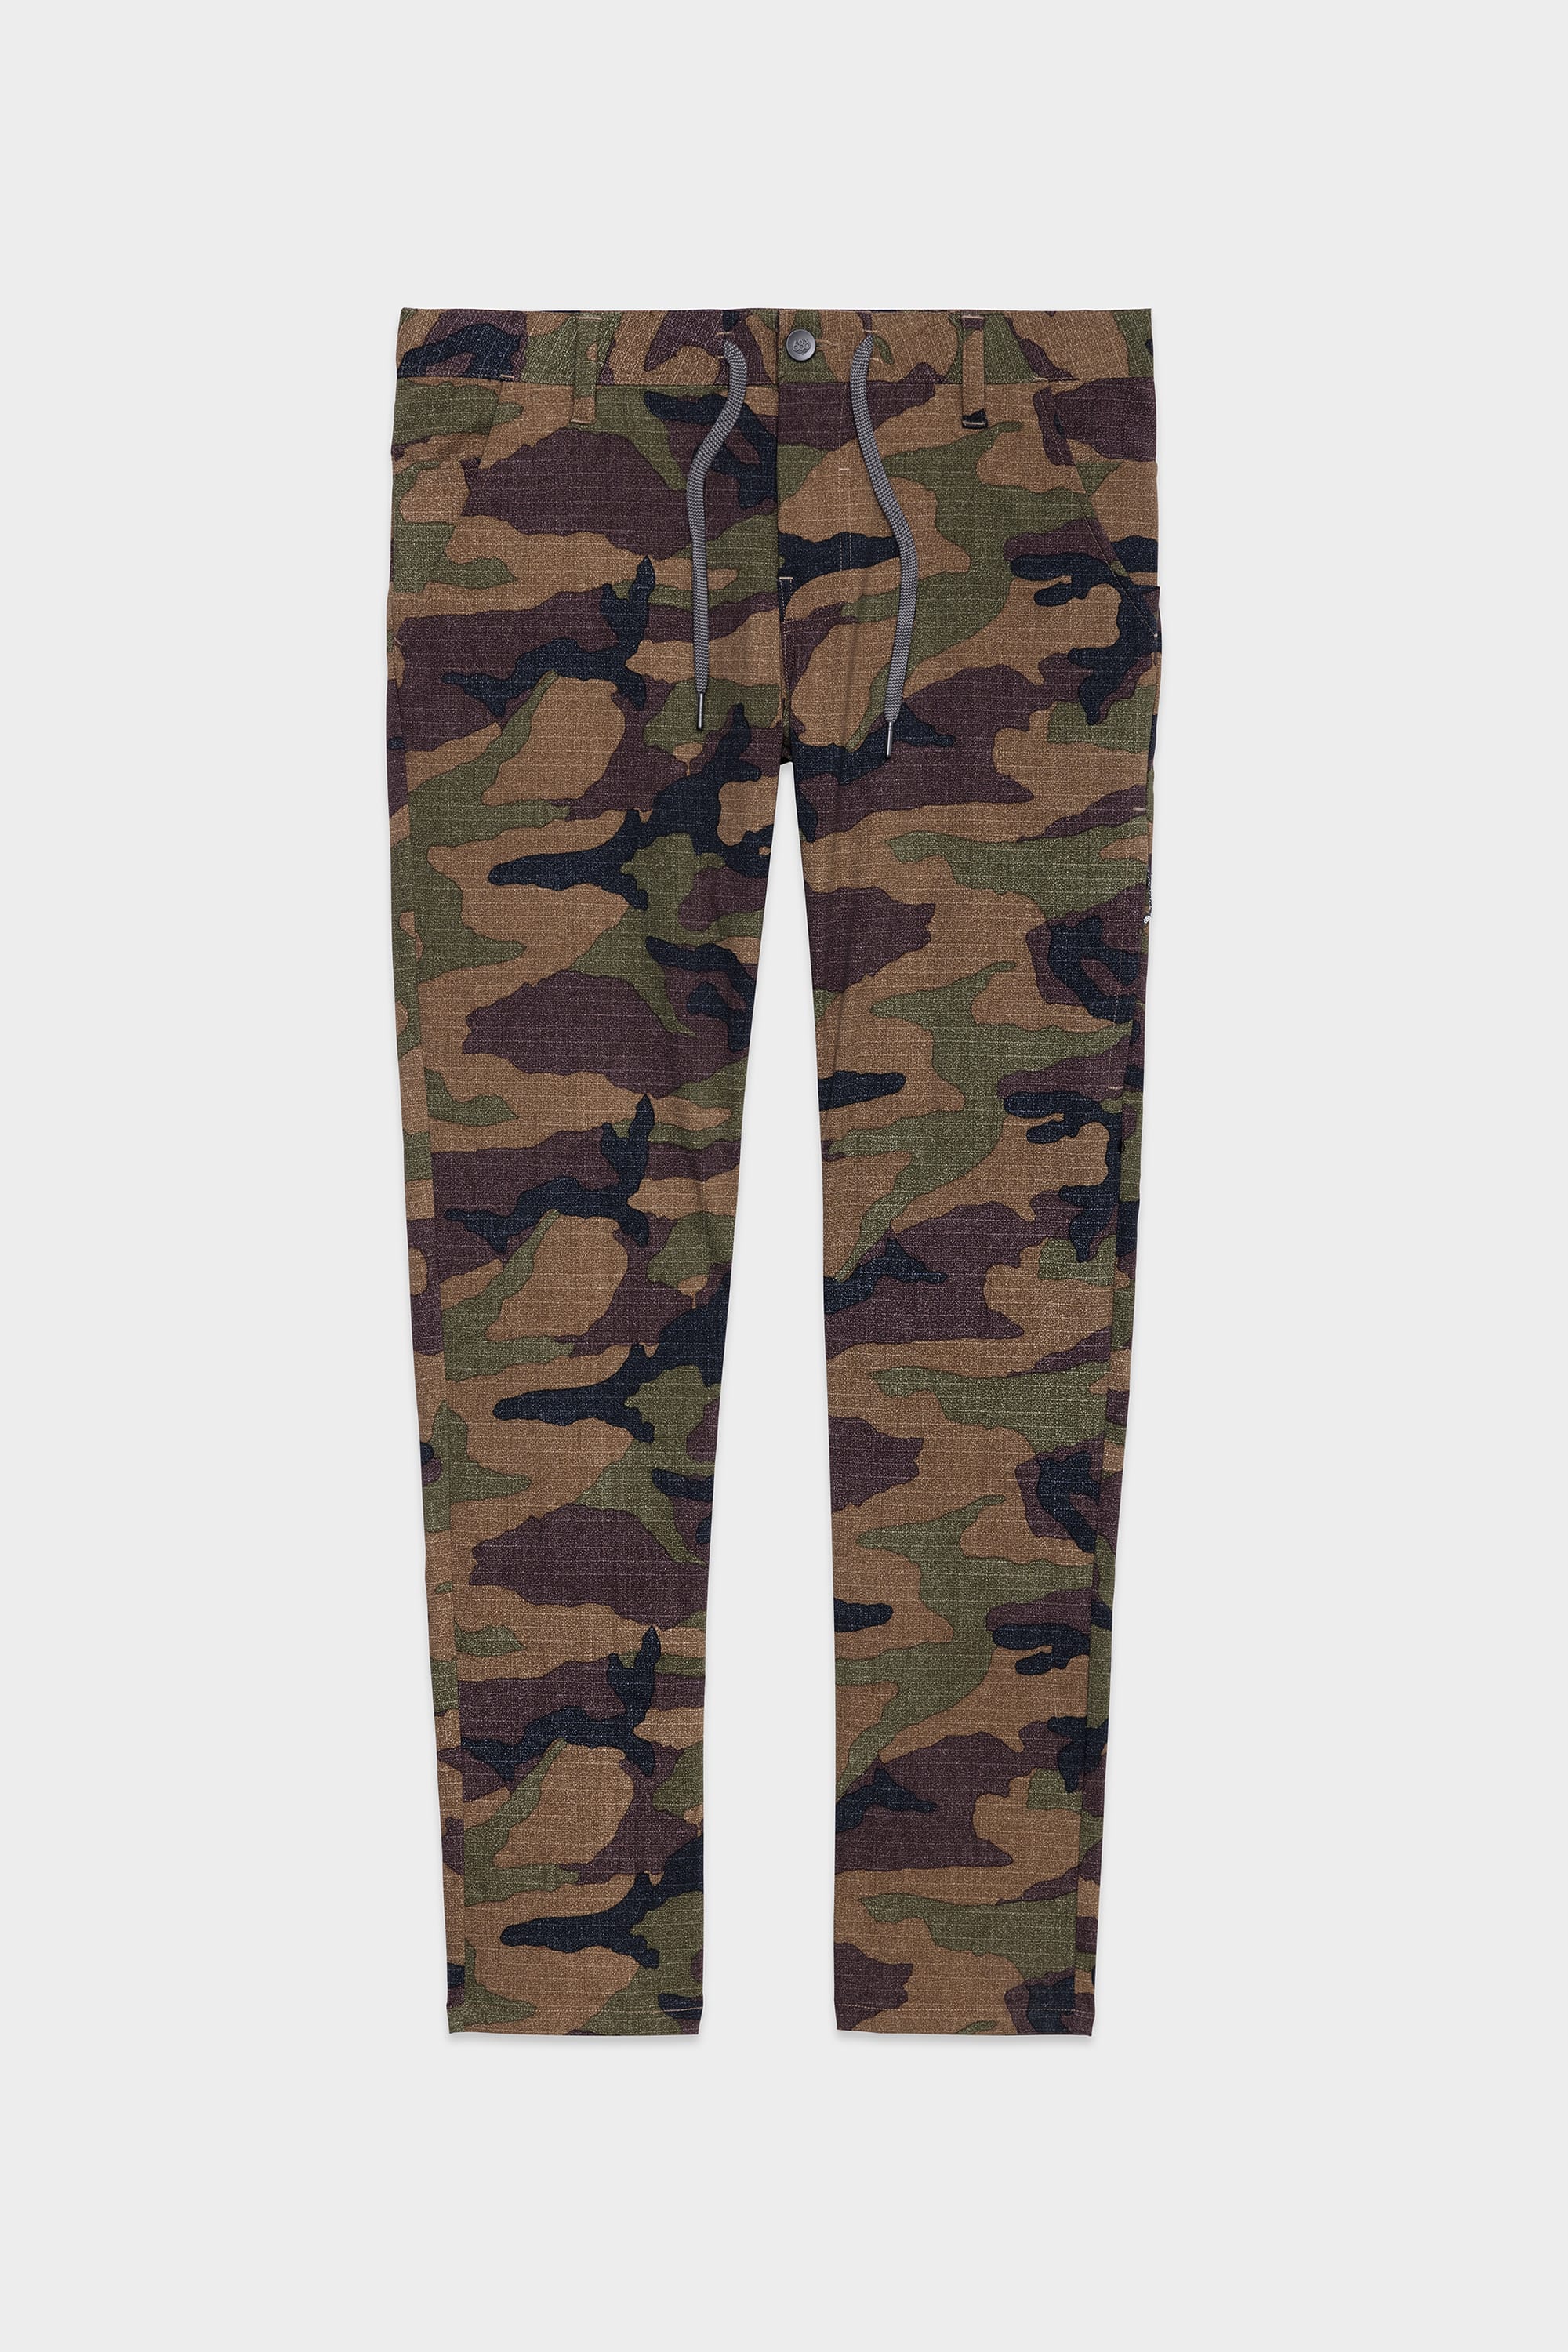 Camouflage Capris products for sale